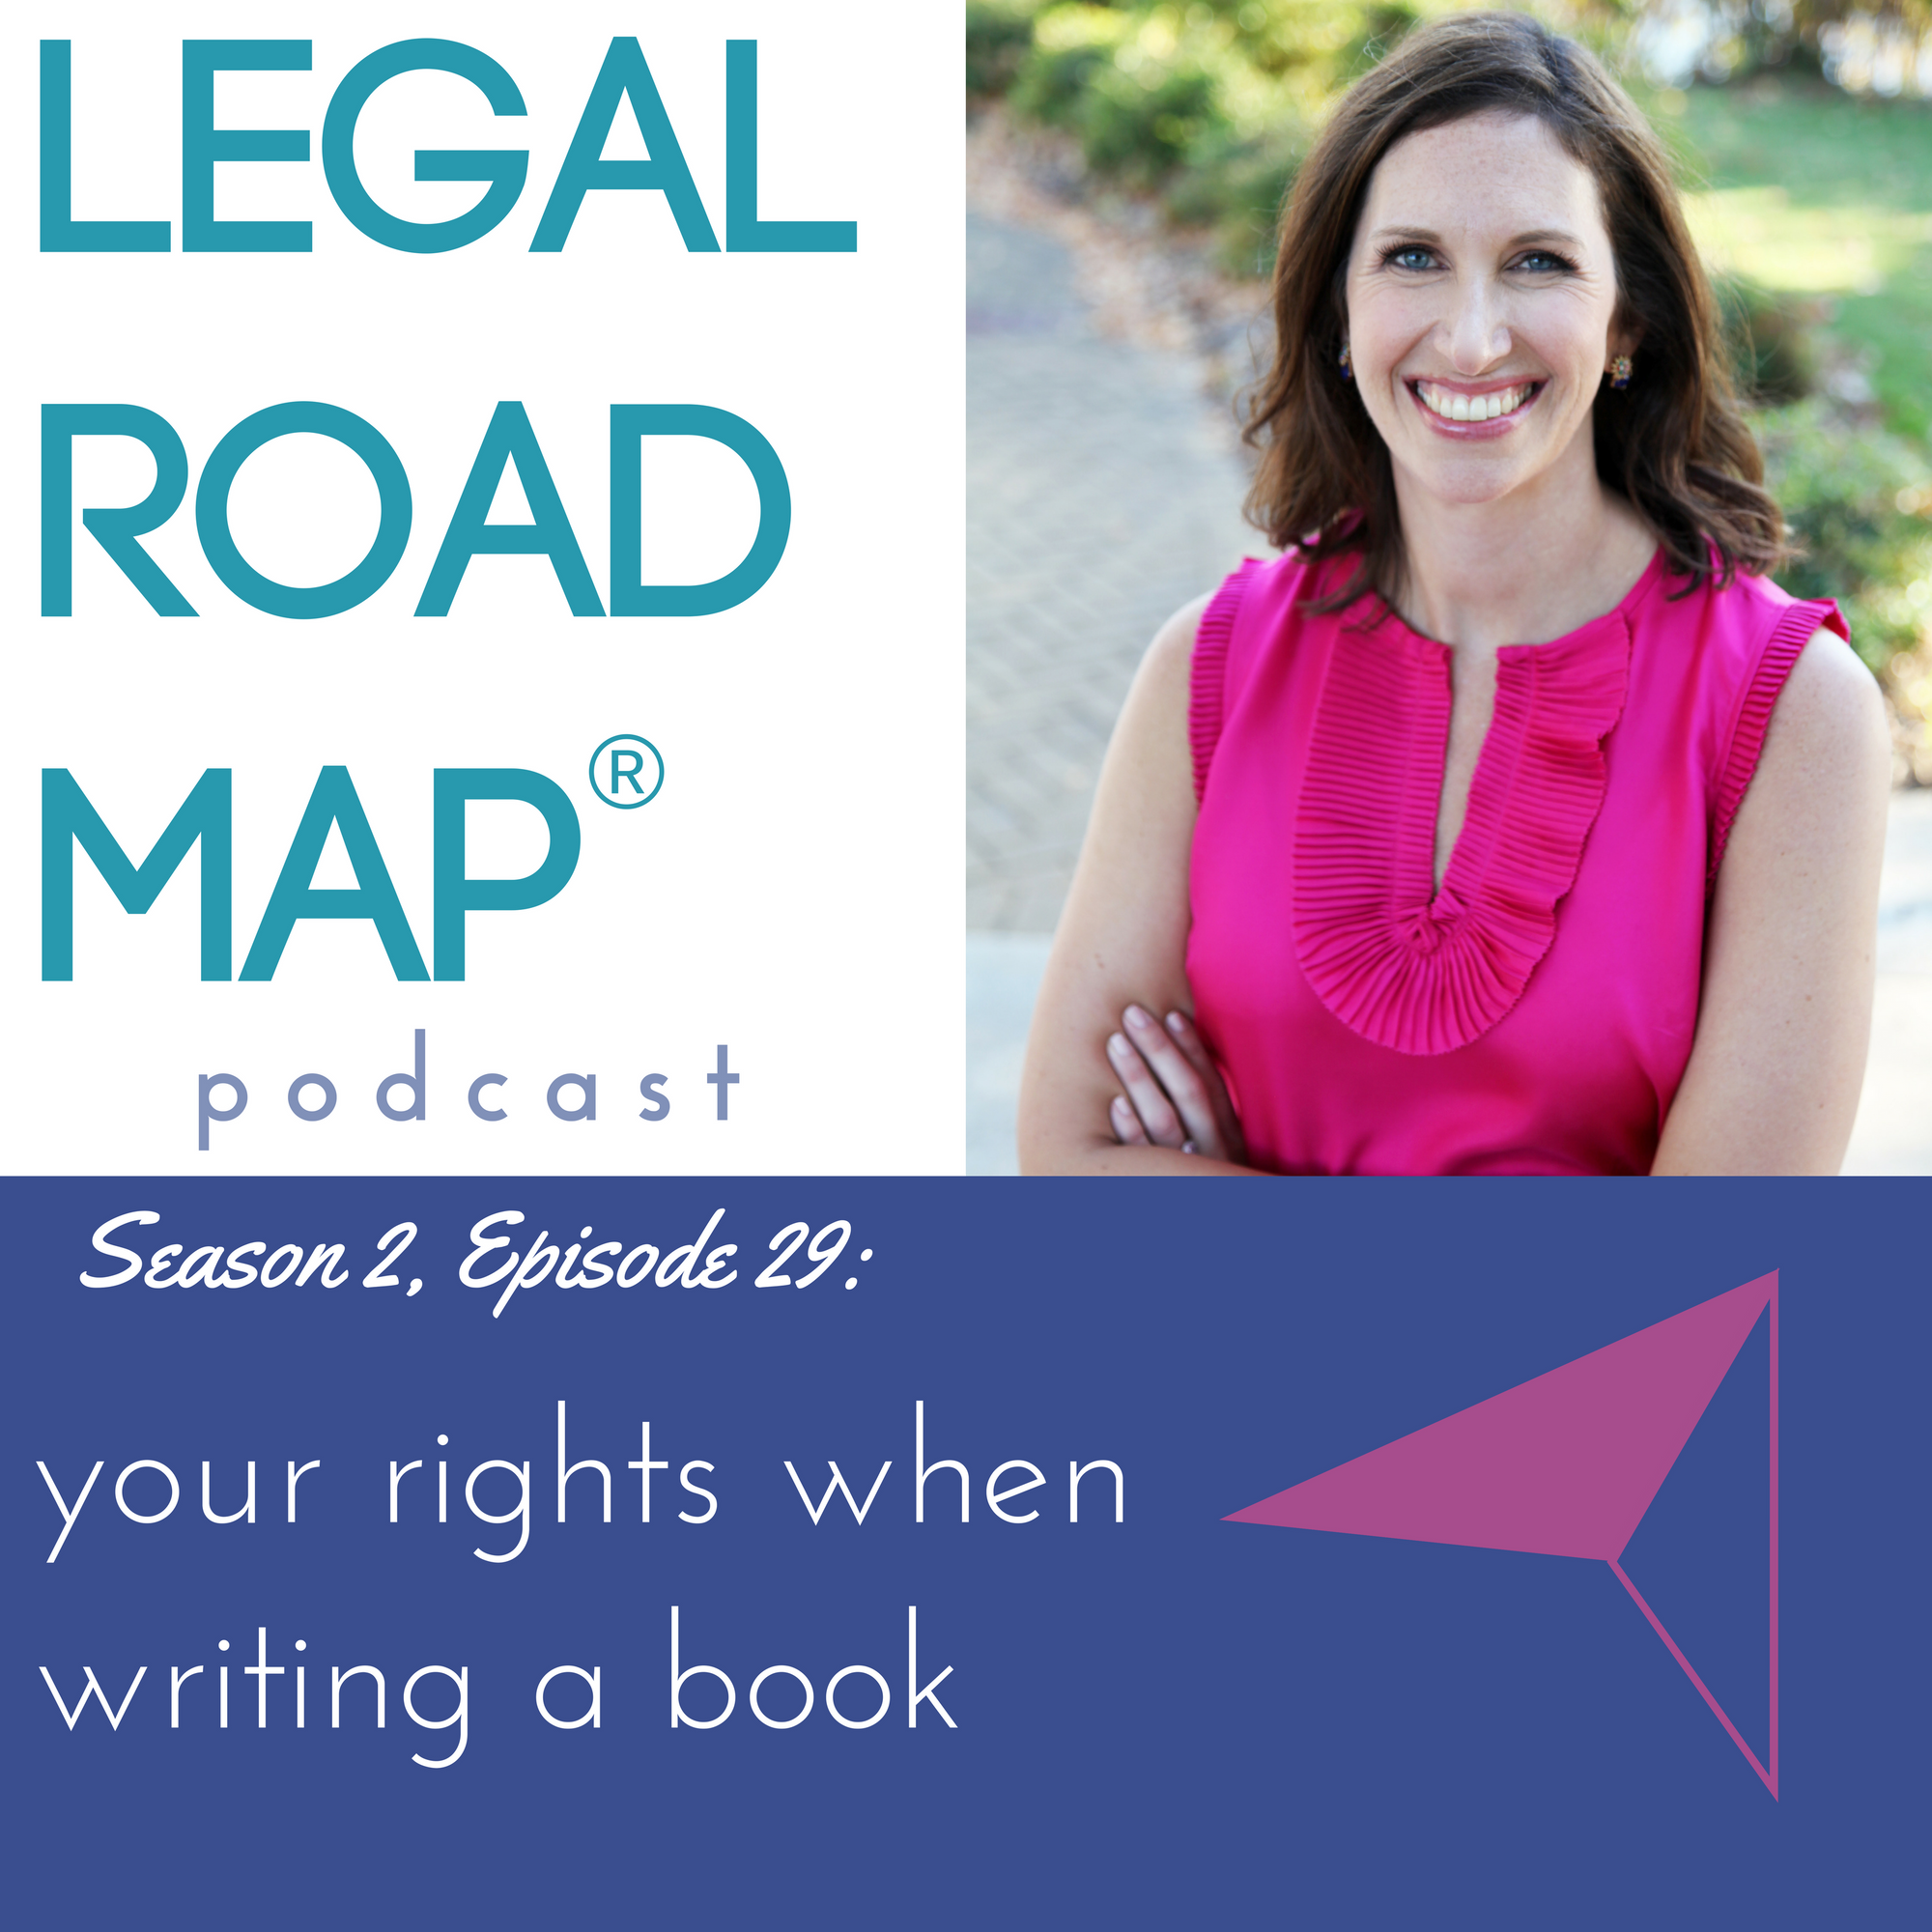 Your rights when writing a book (Legal Road Map® Podcast S2E29)